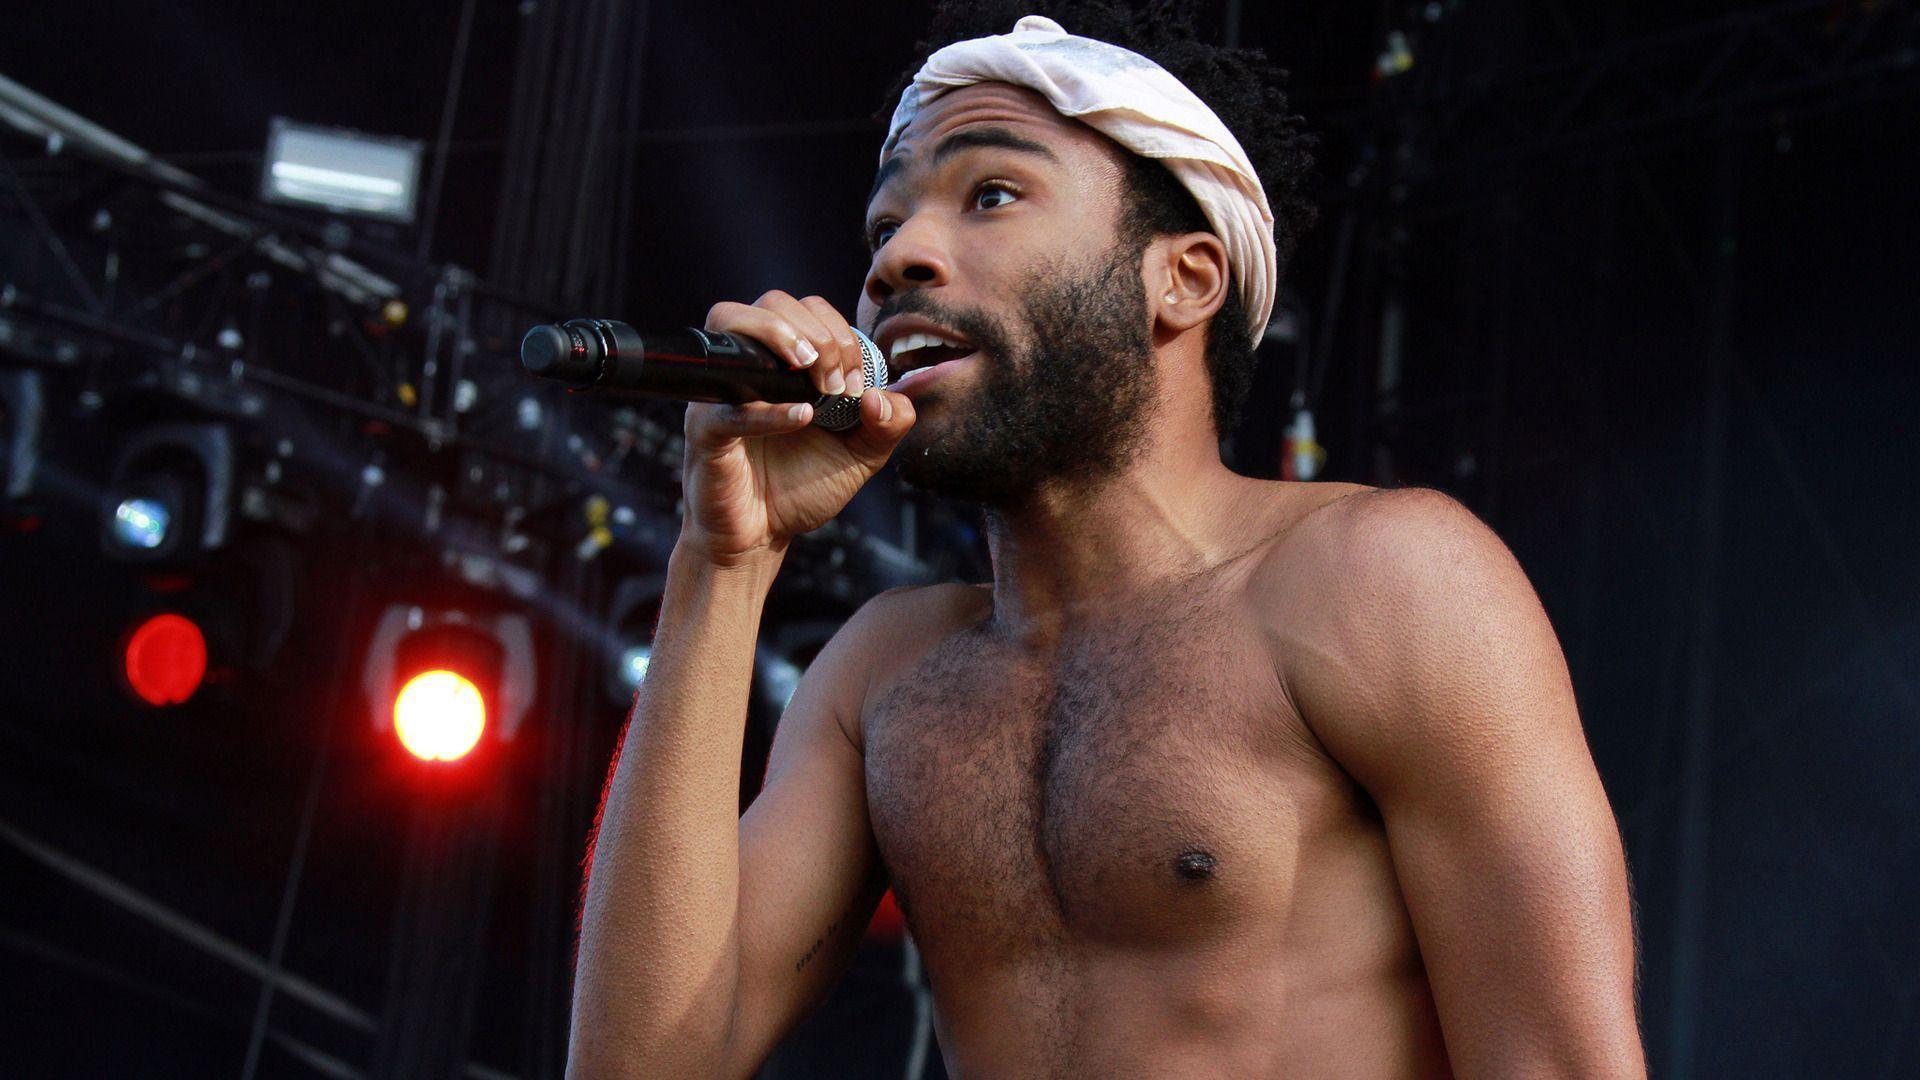 Donald Glover Wallpaper Image Photo Picture Background